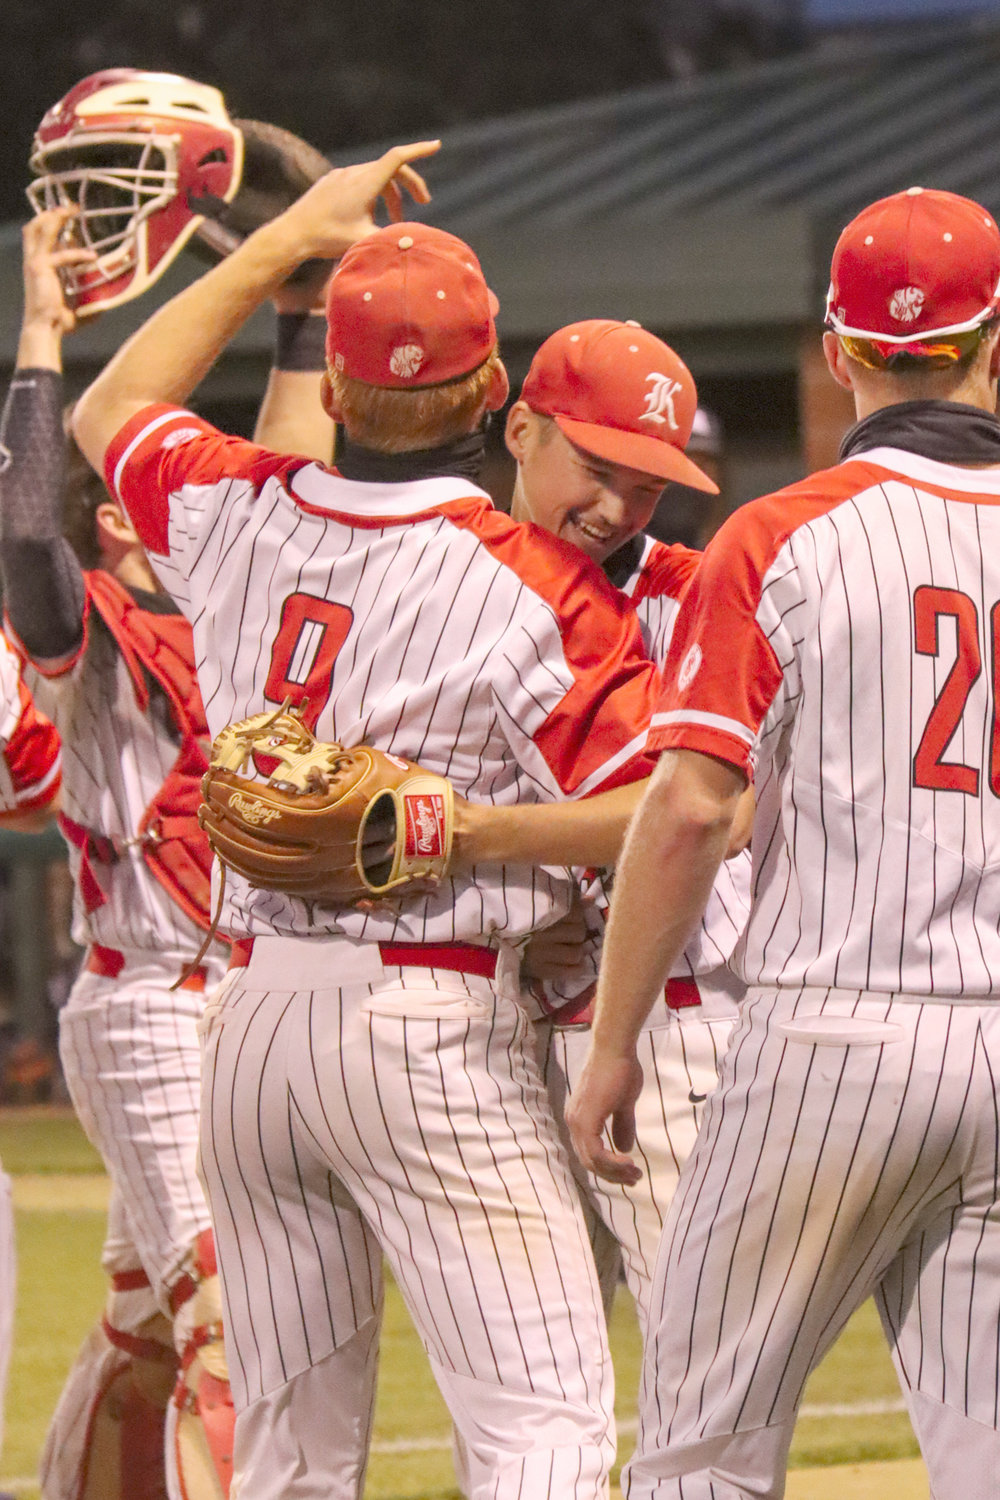 Katy High baseball players celebrate after their 11-2 win over Seven Lakes on Tuesday, April 20, at Katy High that secured the District 19-6A title outright for the Tigers.